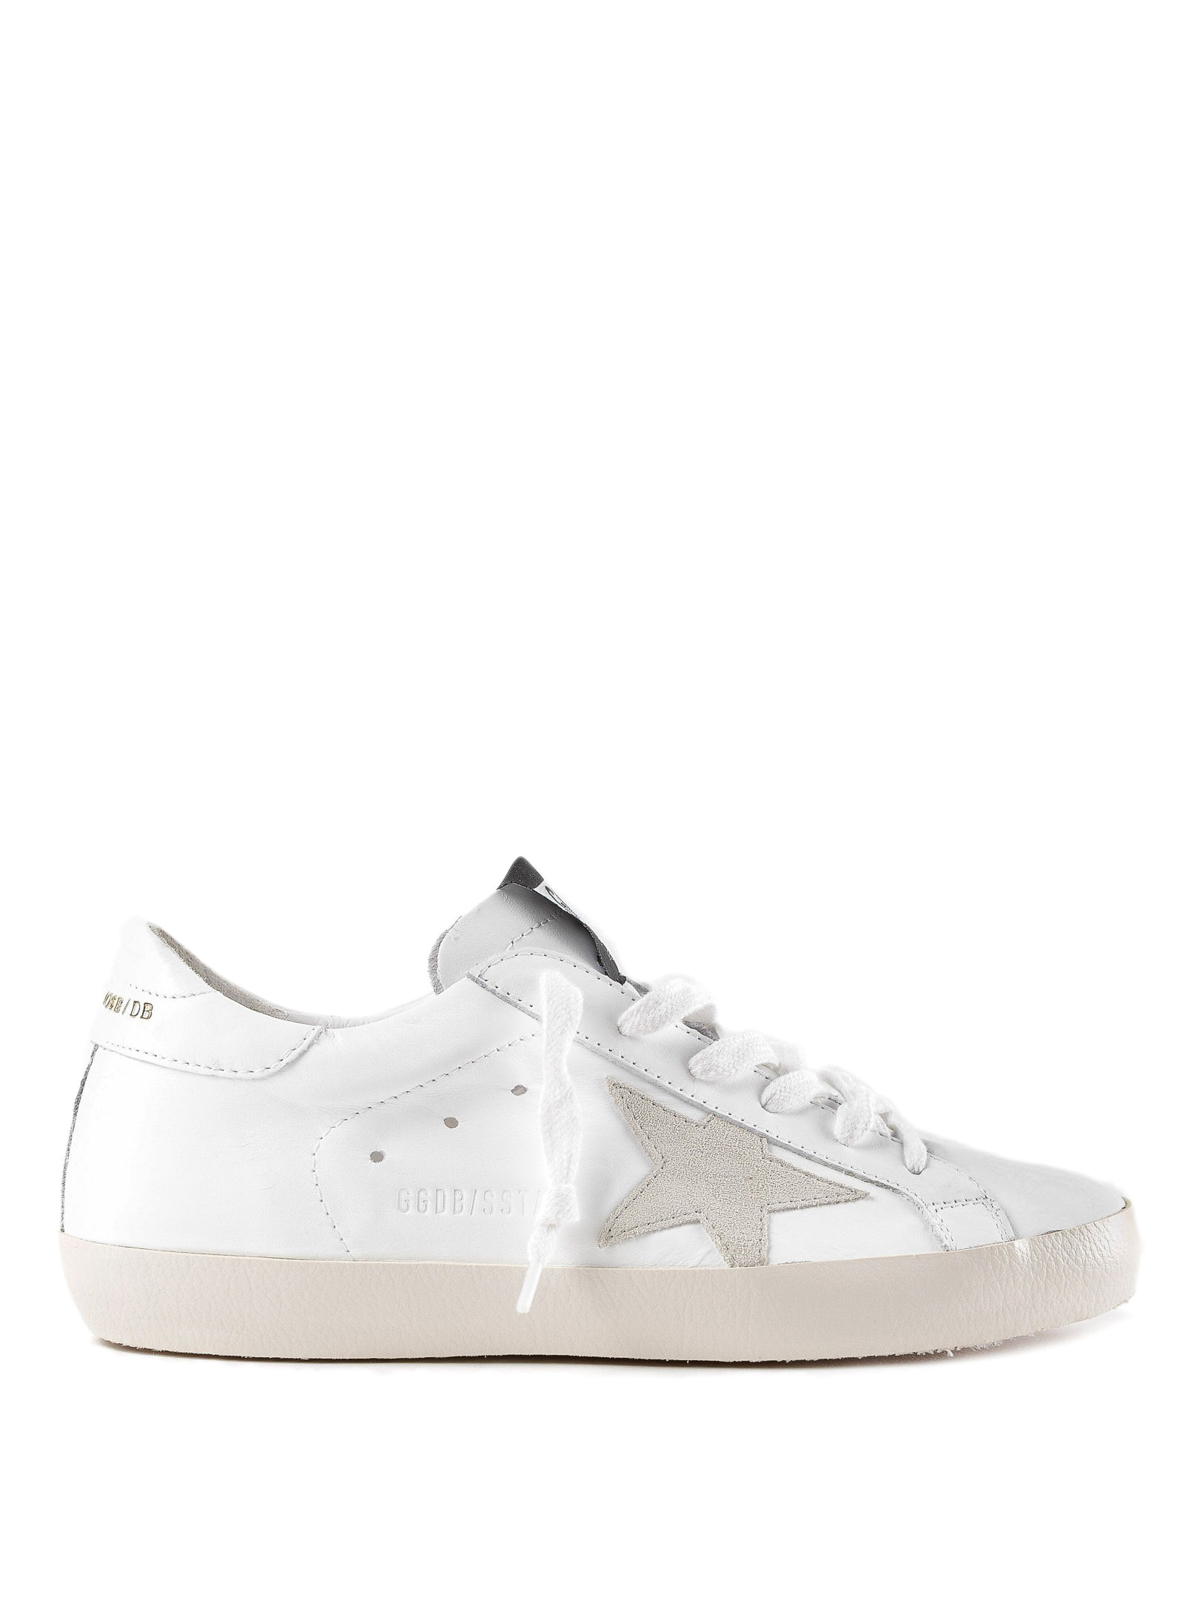 golden goose superstar leather trainers